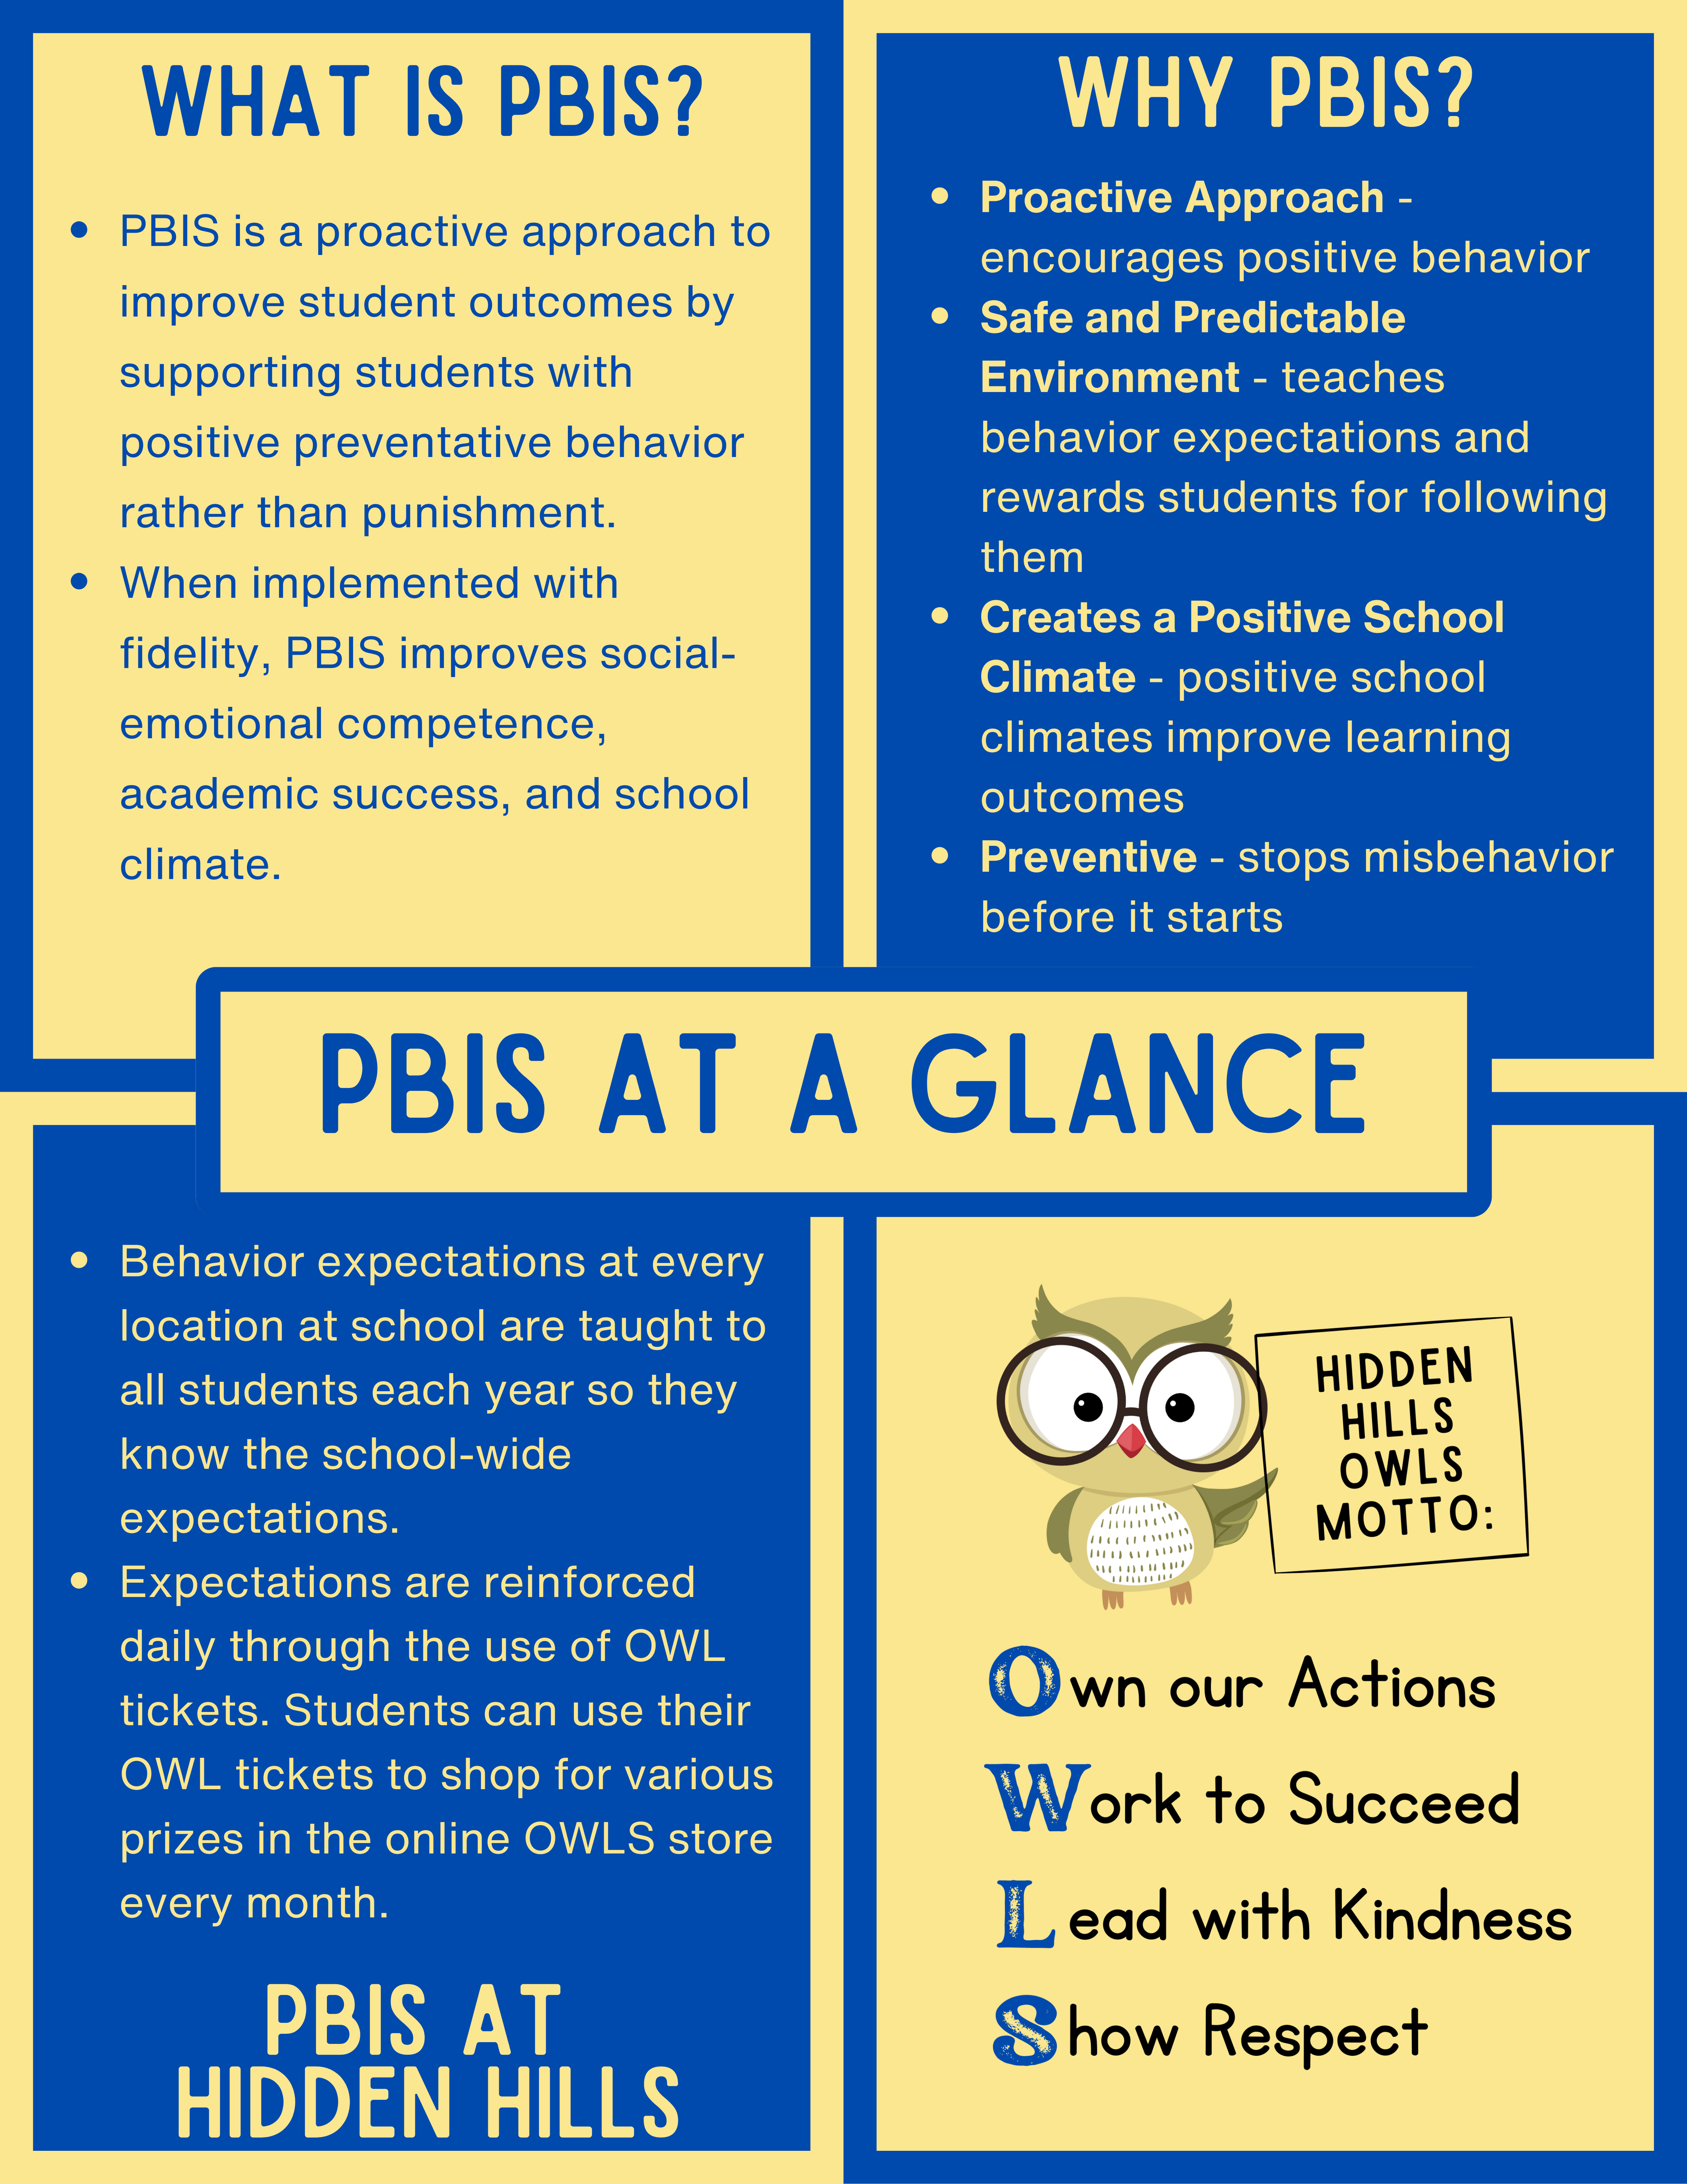 Picture of a document explaining what PBIS is at Hidden Hills Elementary